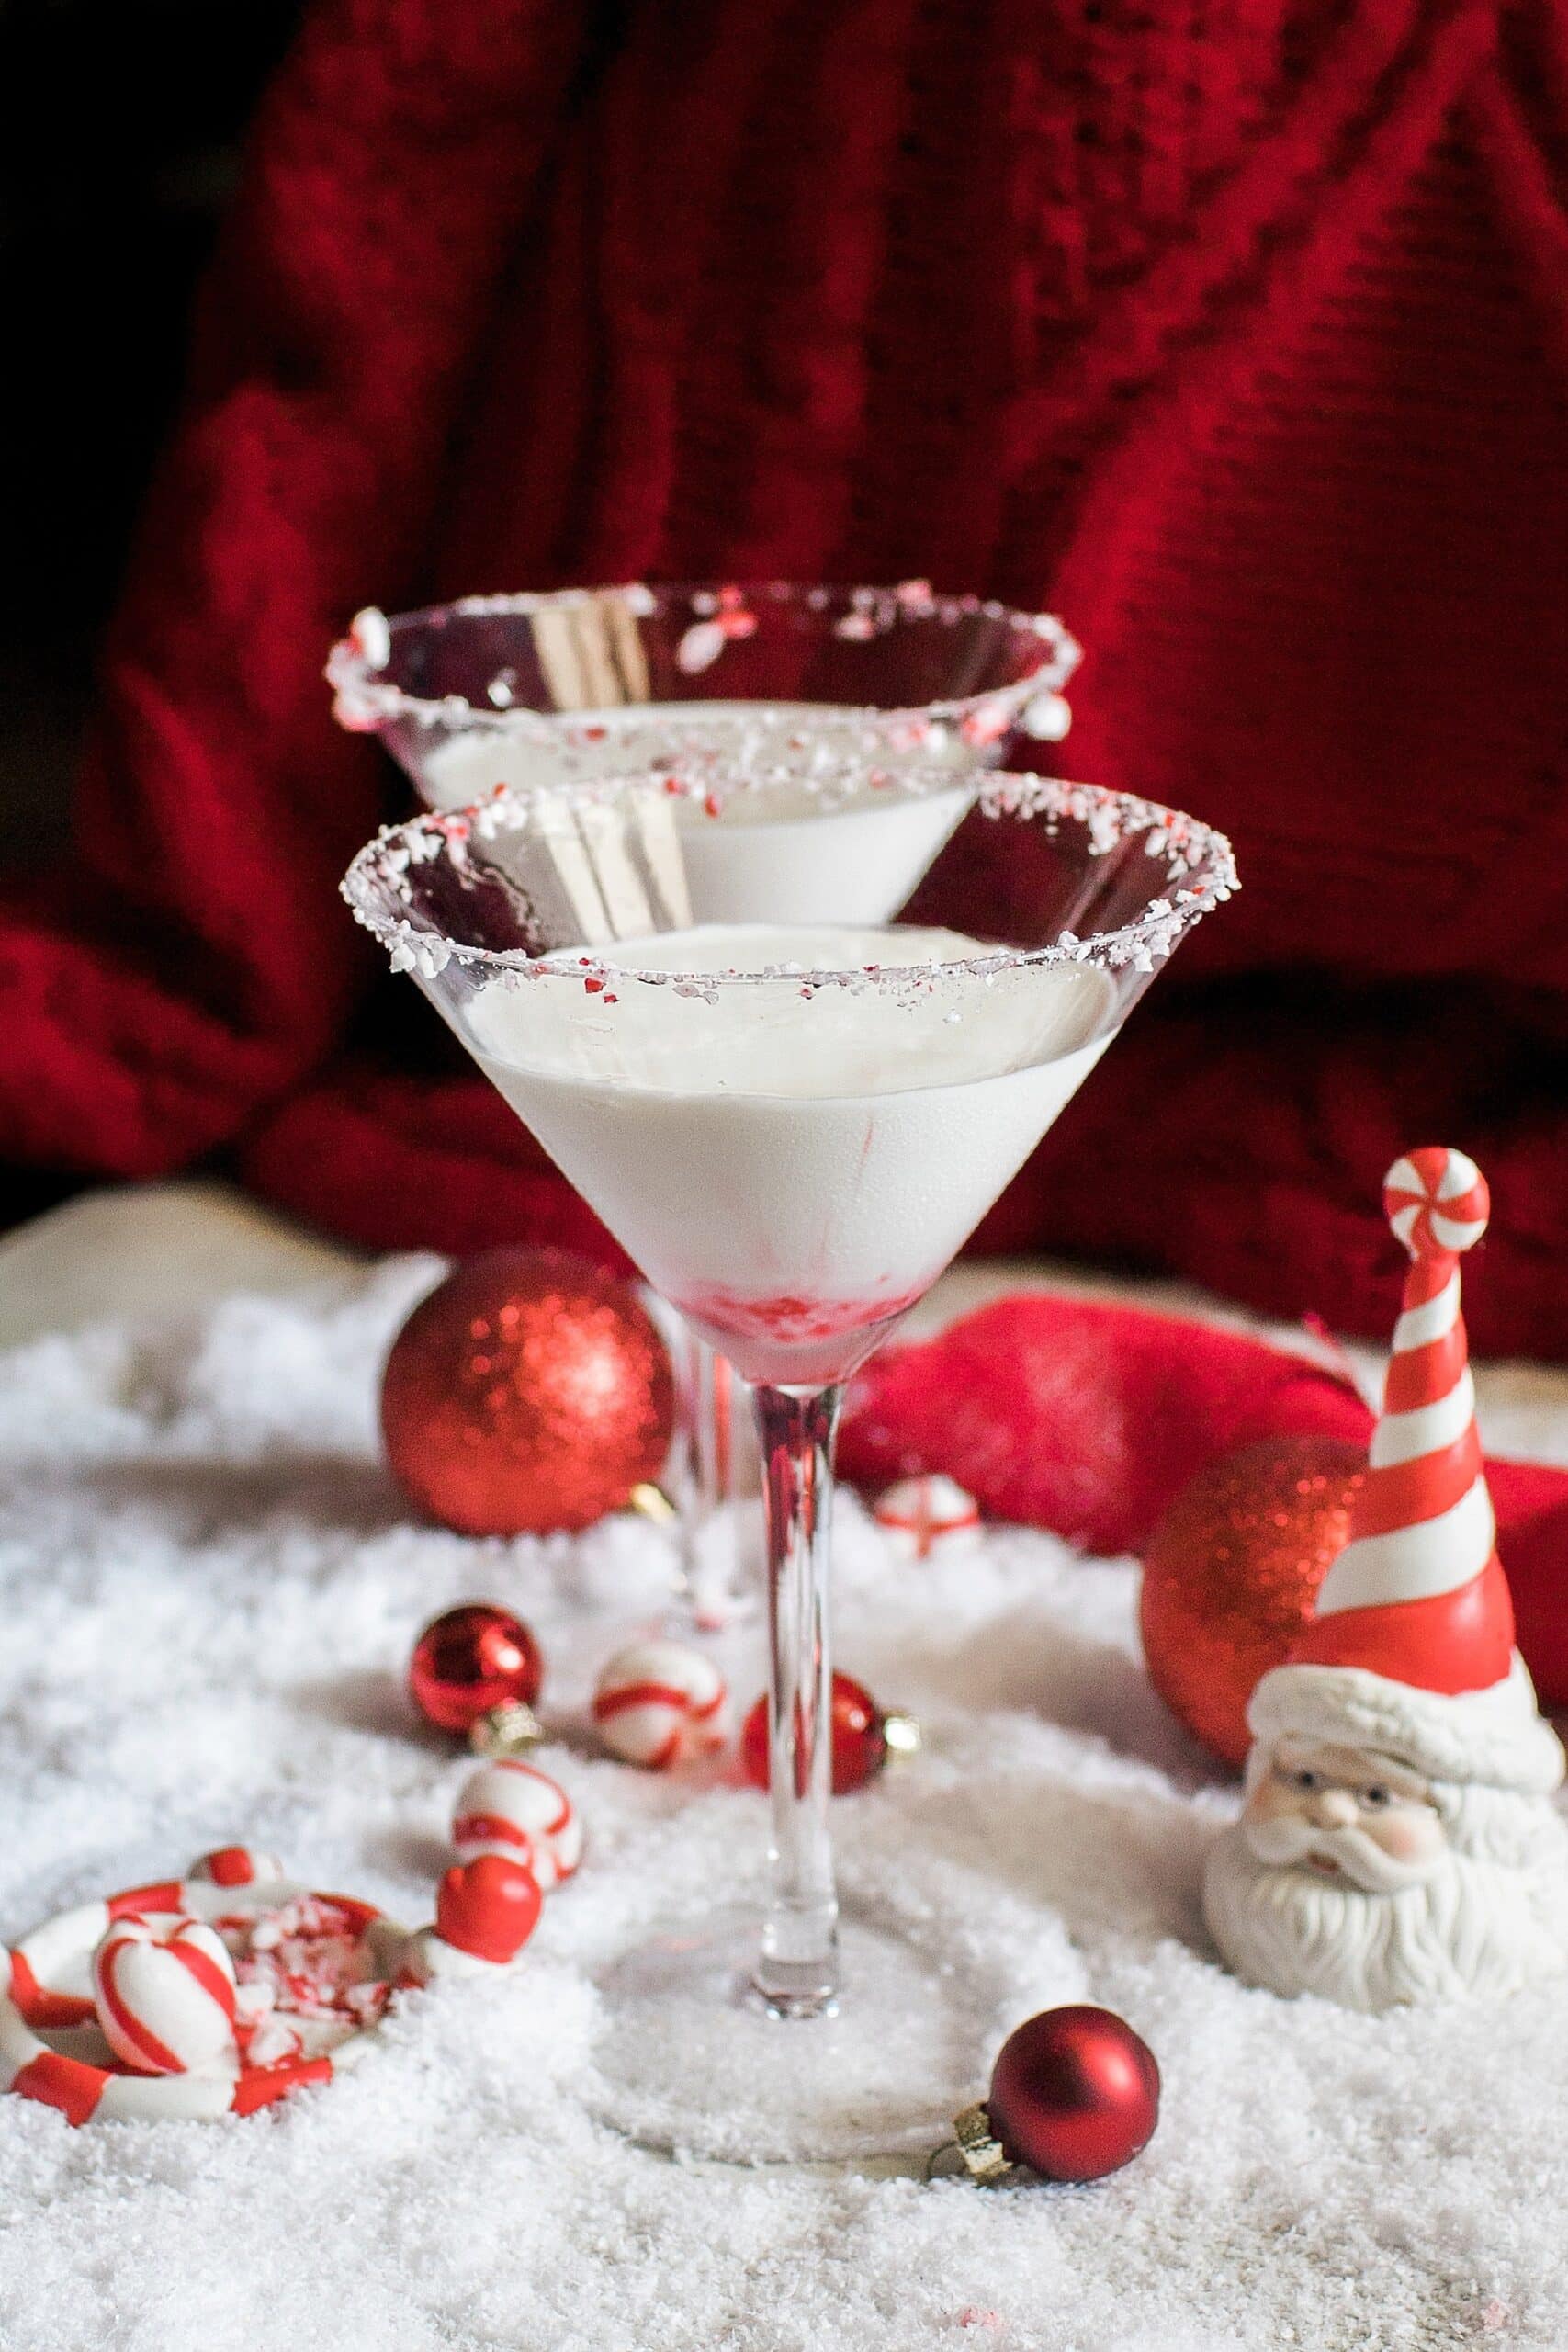 Two festive martinis with candy canes and red and white decorations.